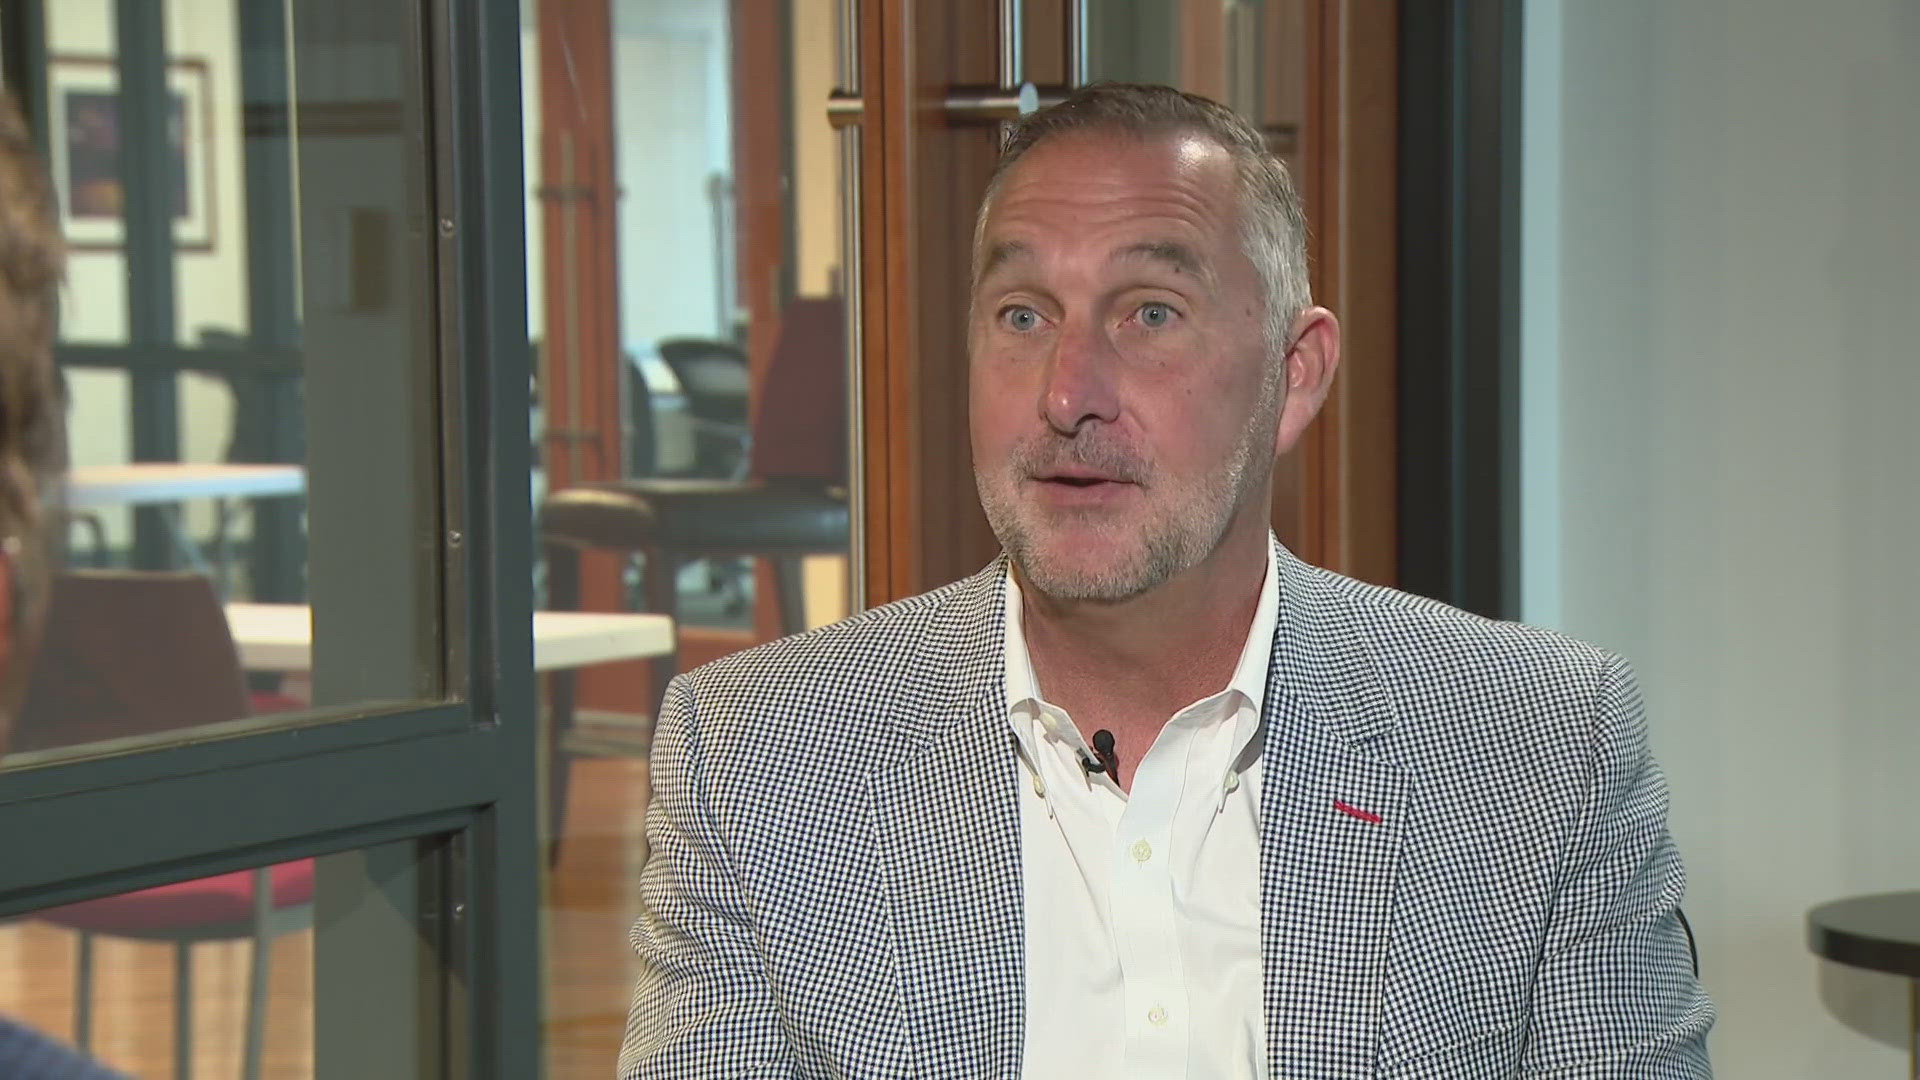 Frank Cusumano sat down with St. Louis Cardinals president John Mozeliak to discuss the state of the team. Cusumano also asked if he reads social media.